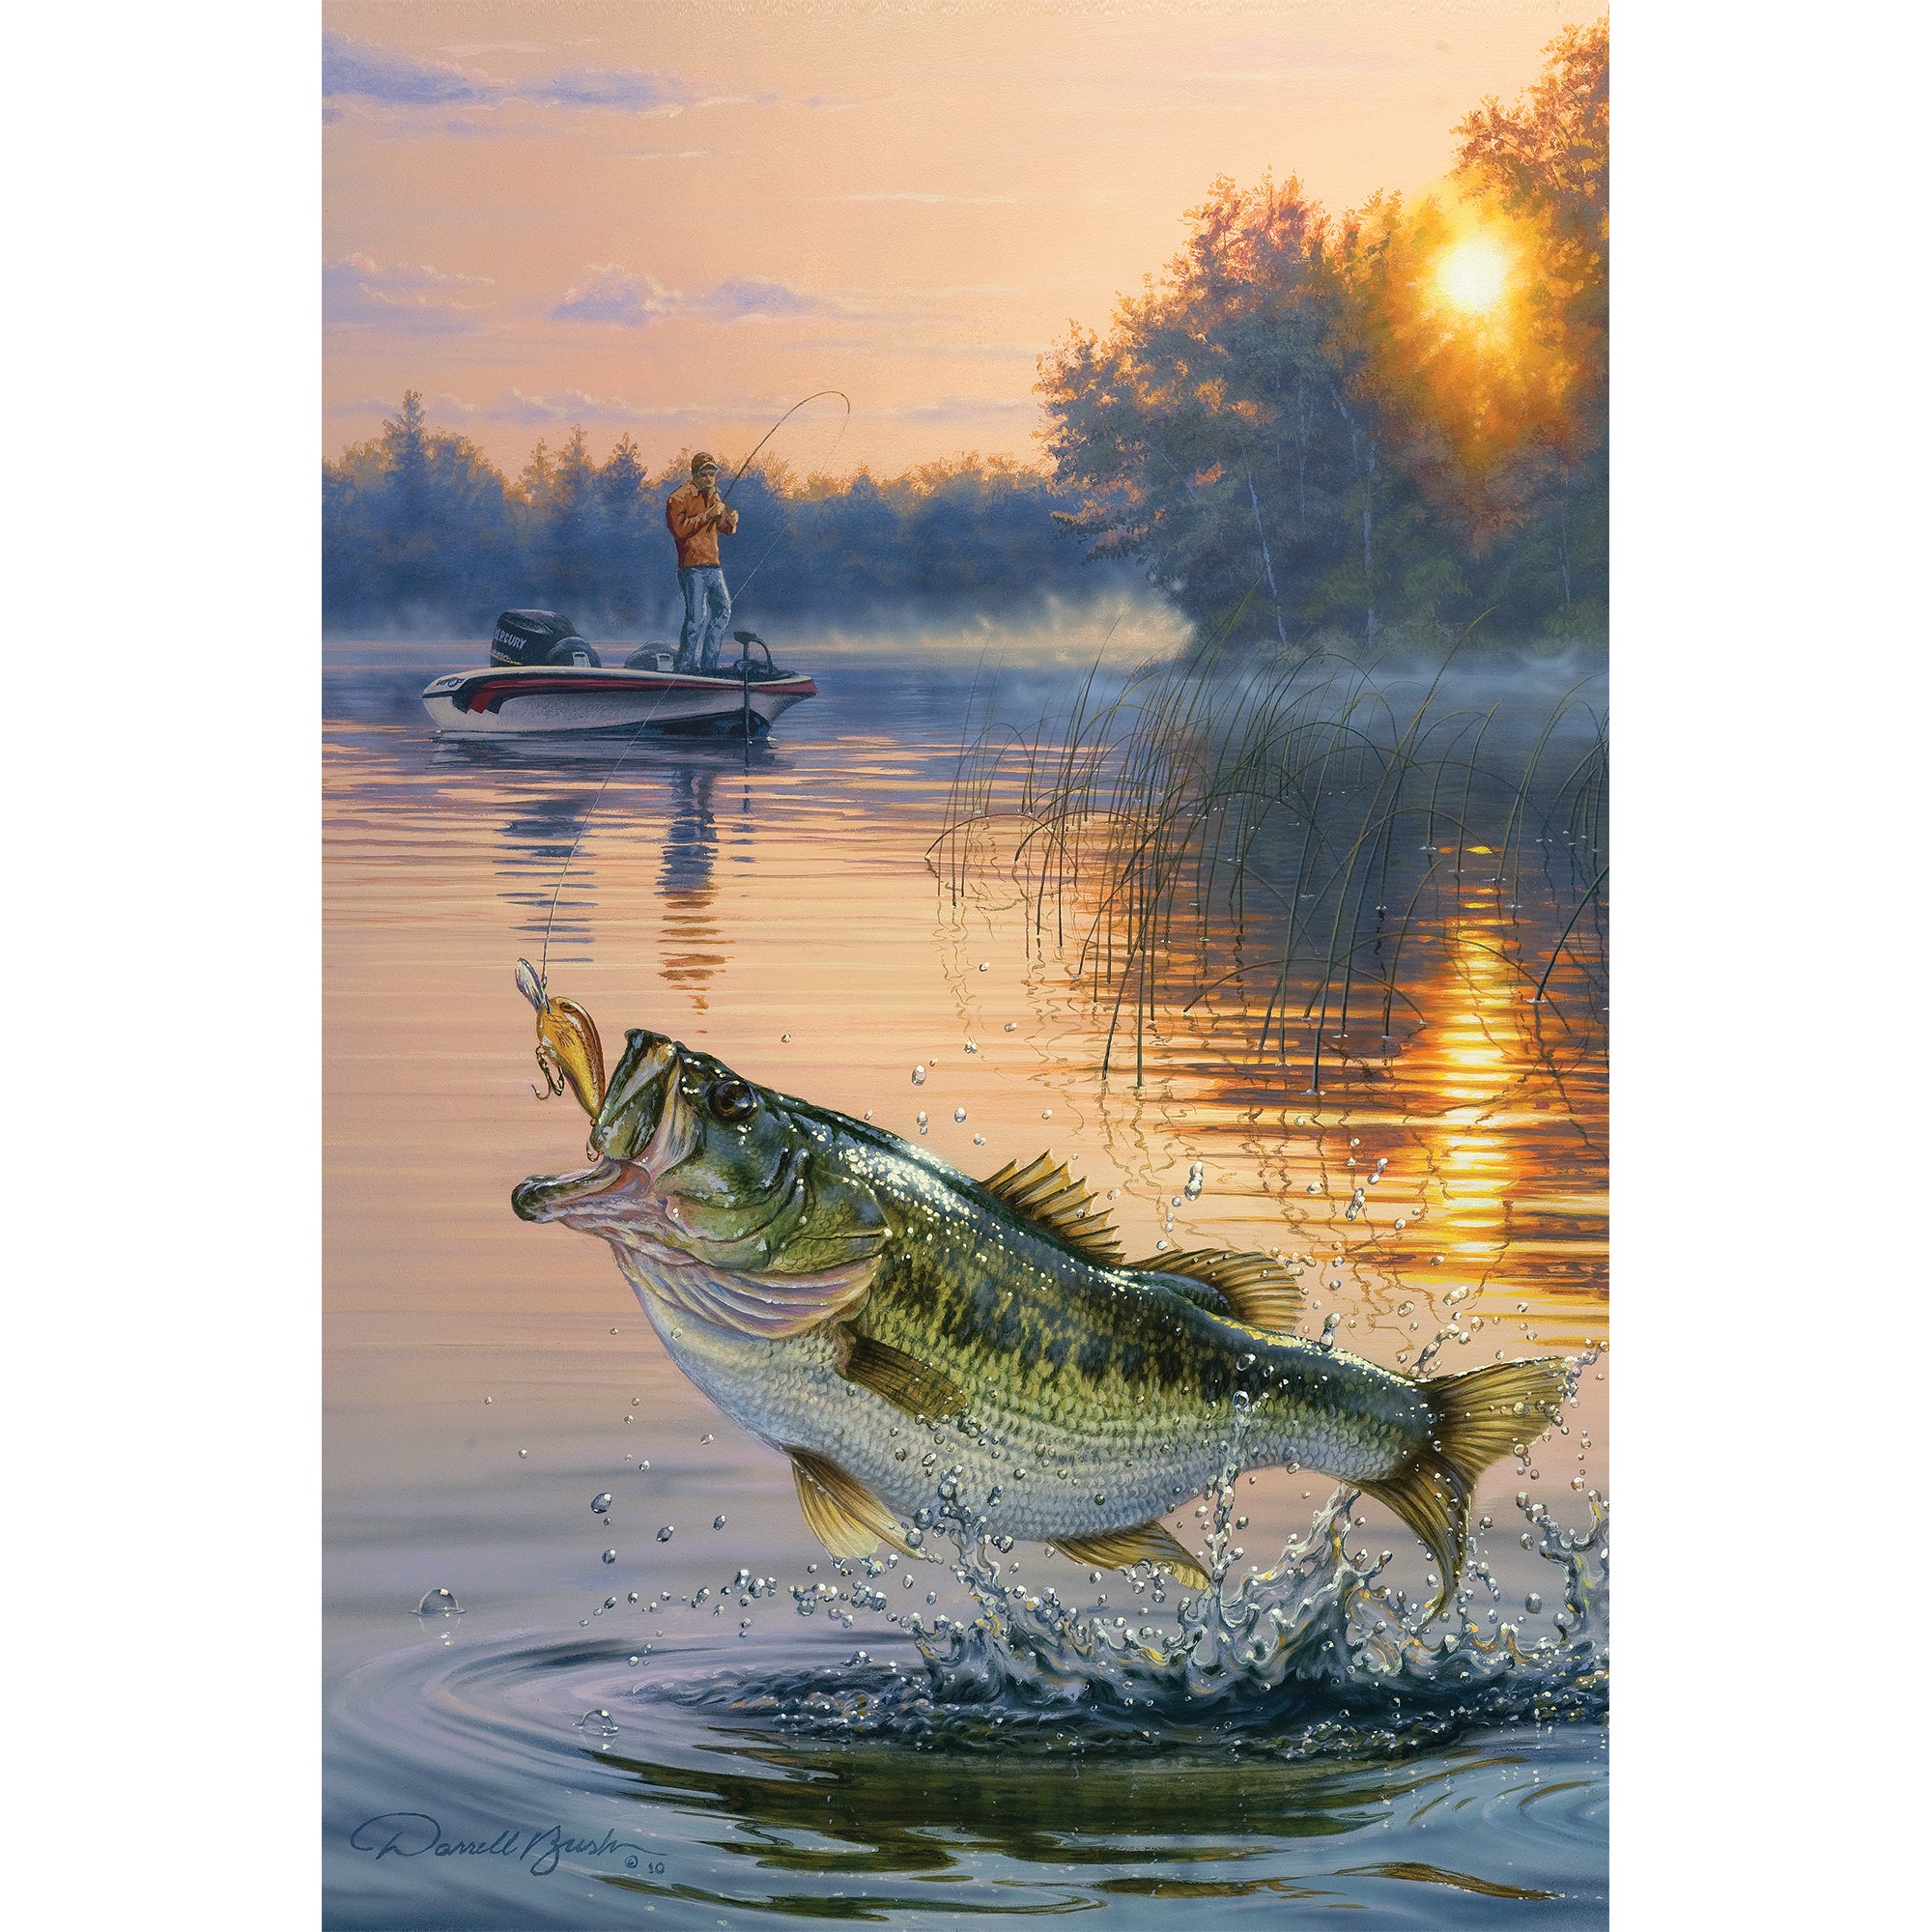 LED Art 24-inches by 16-inches - Catch Bass